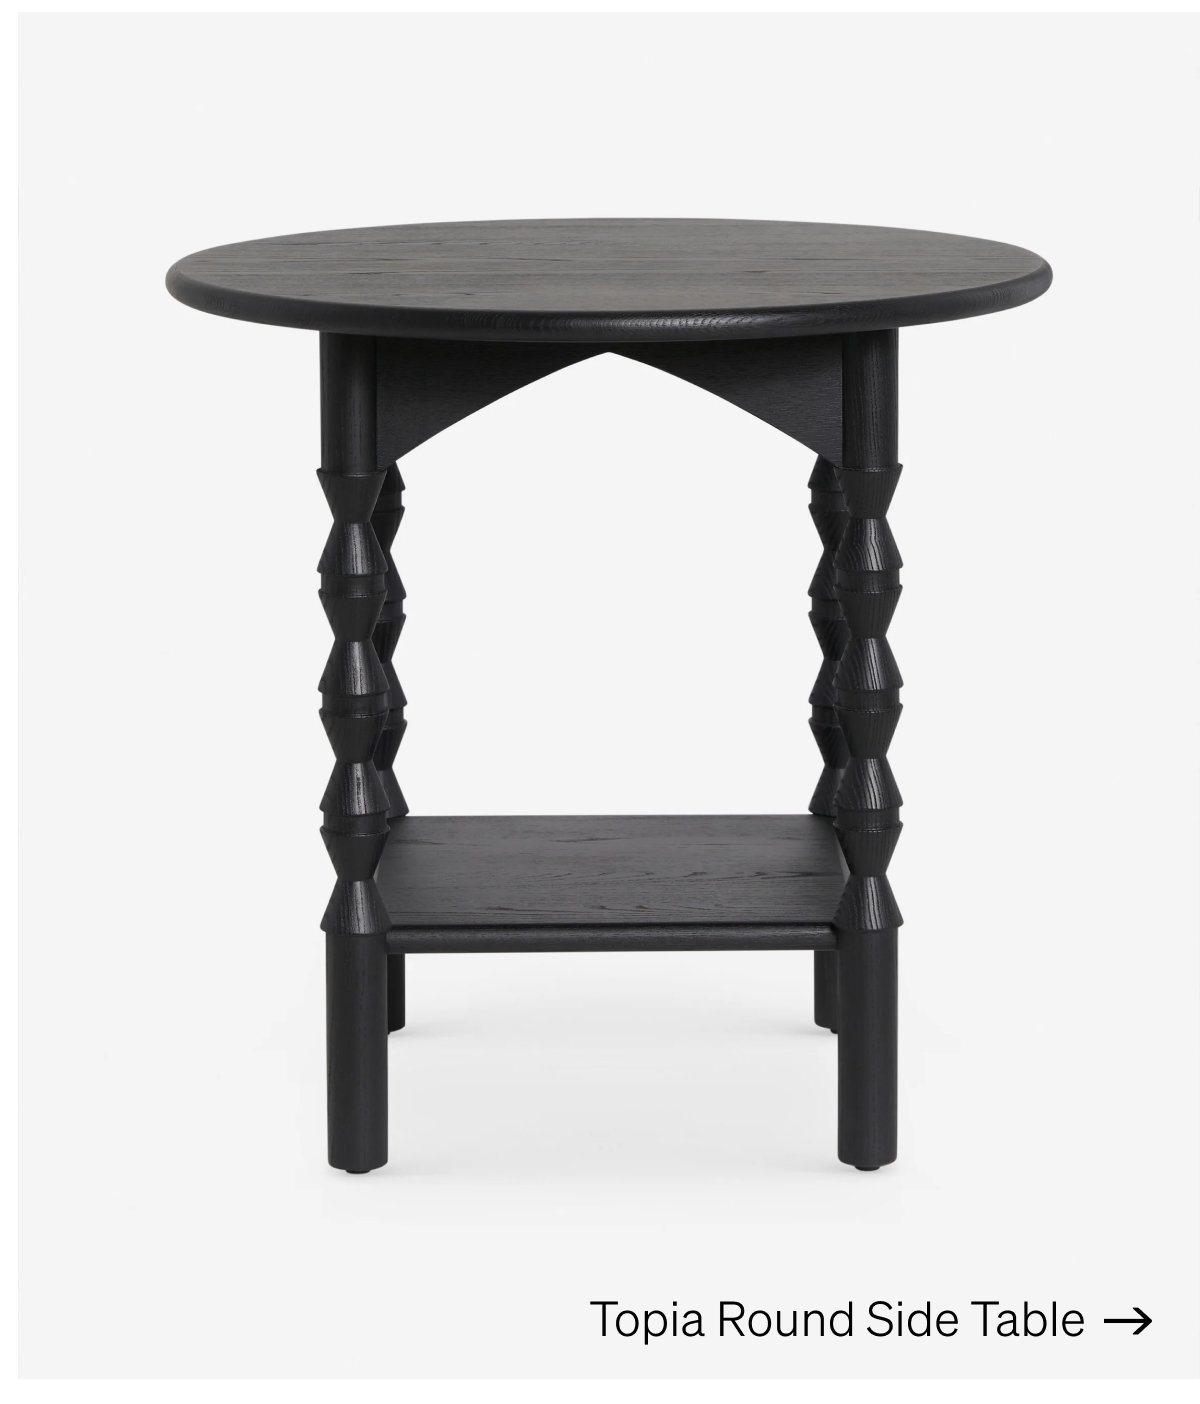 Shop Topia Round Side Table